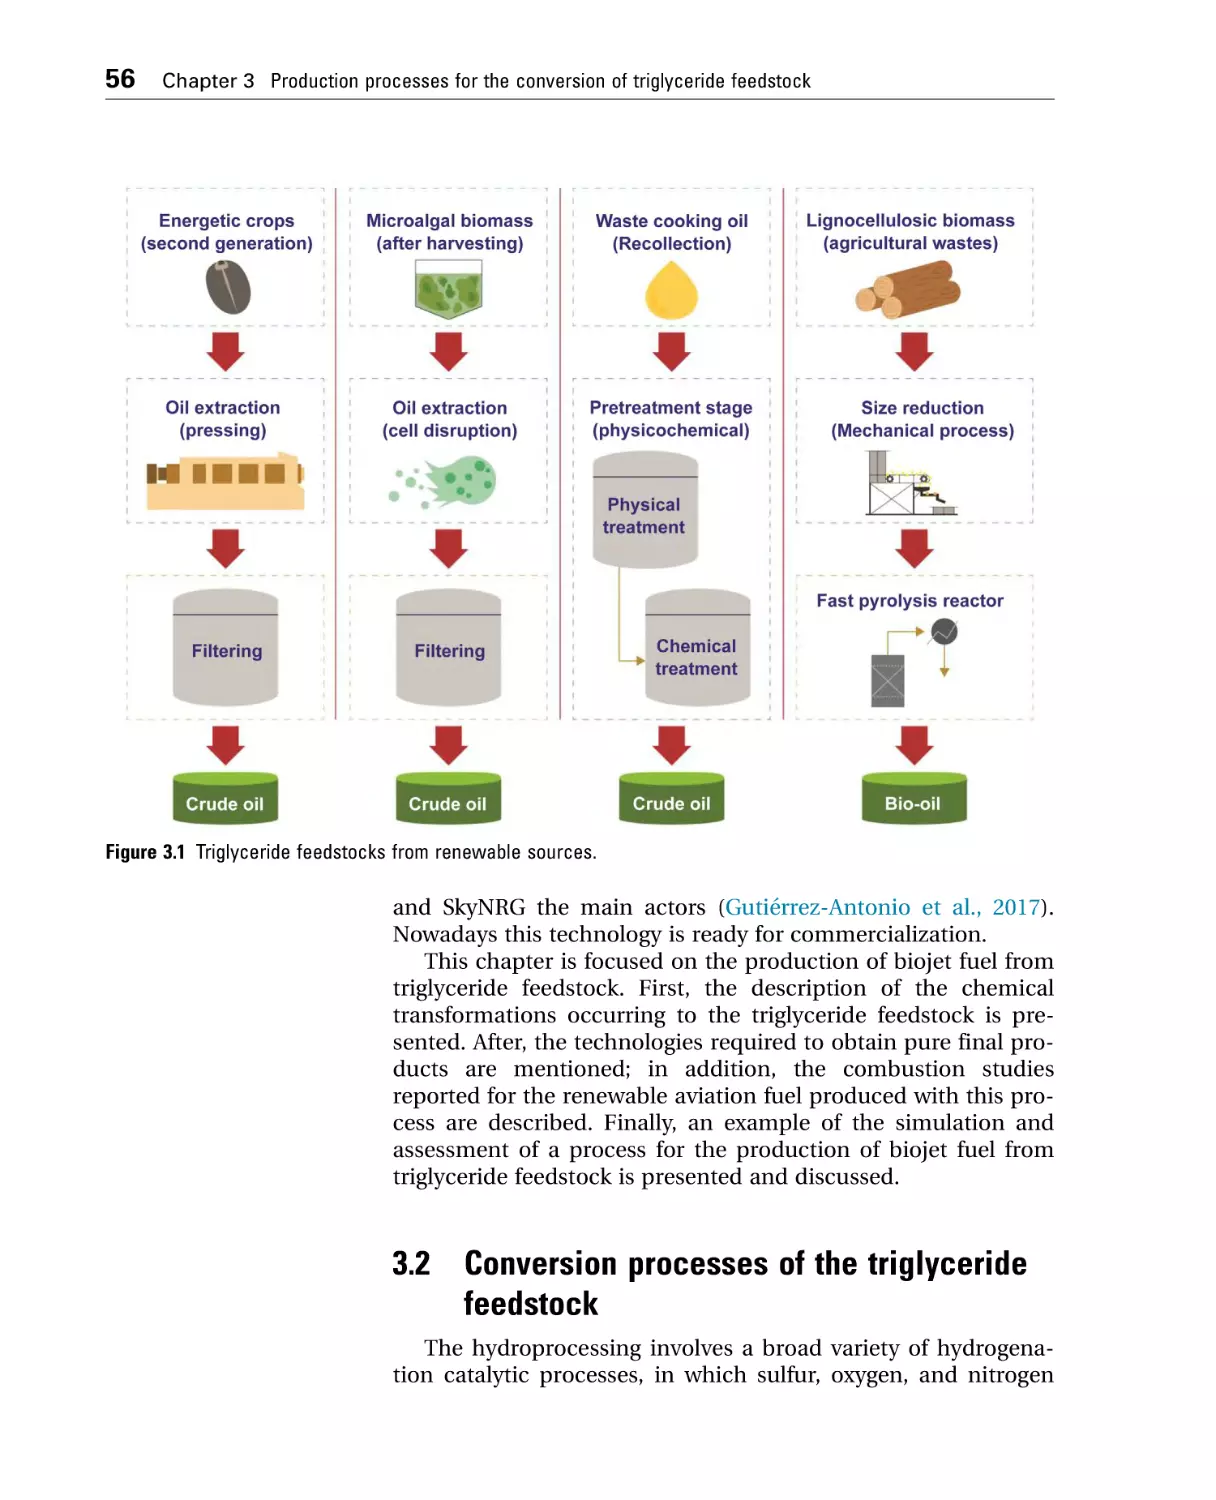 3.2 Conversion processes of the triglyceride feedstock